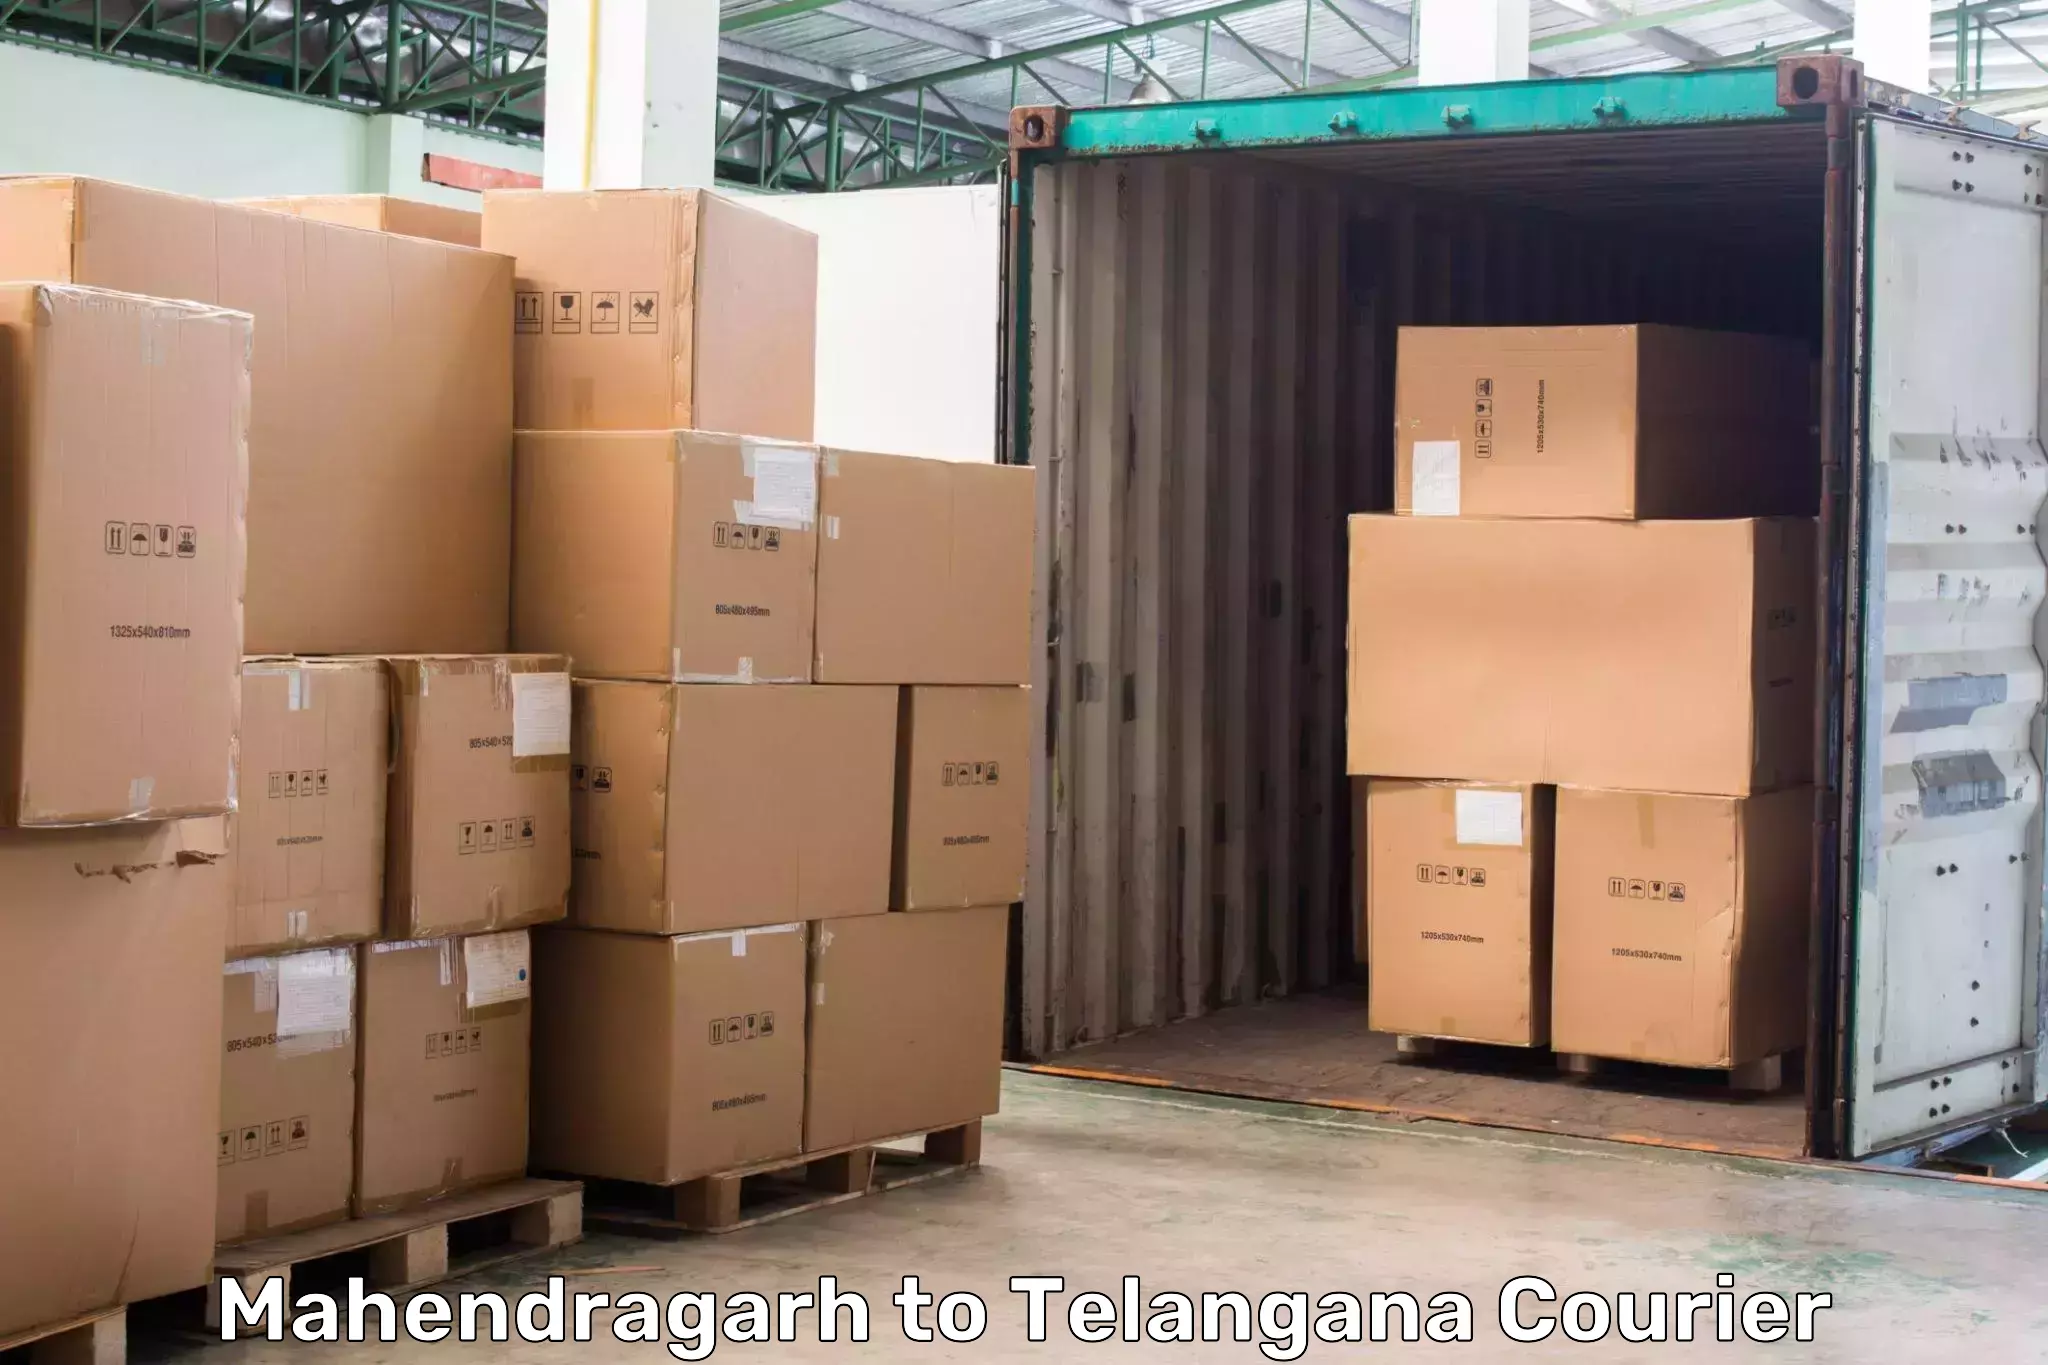 State-of-the-art courier technology Mahendragarh to Jadcherla